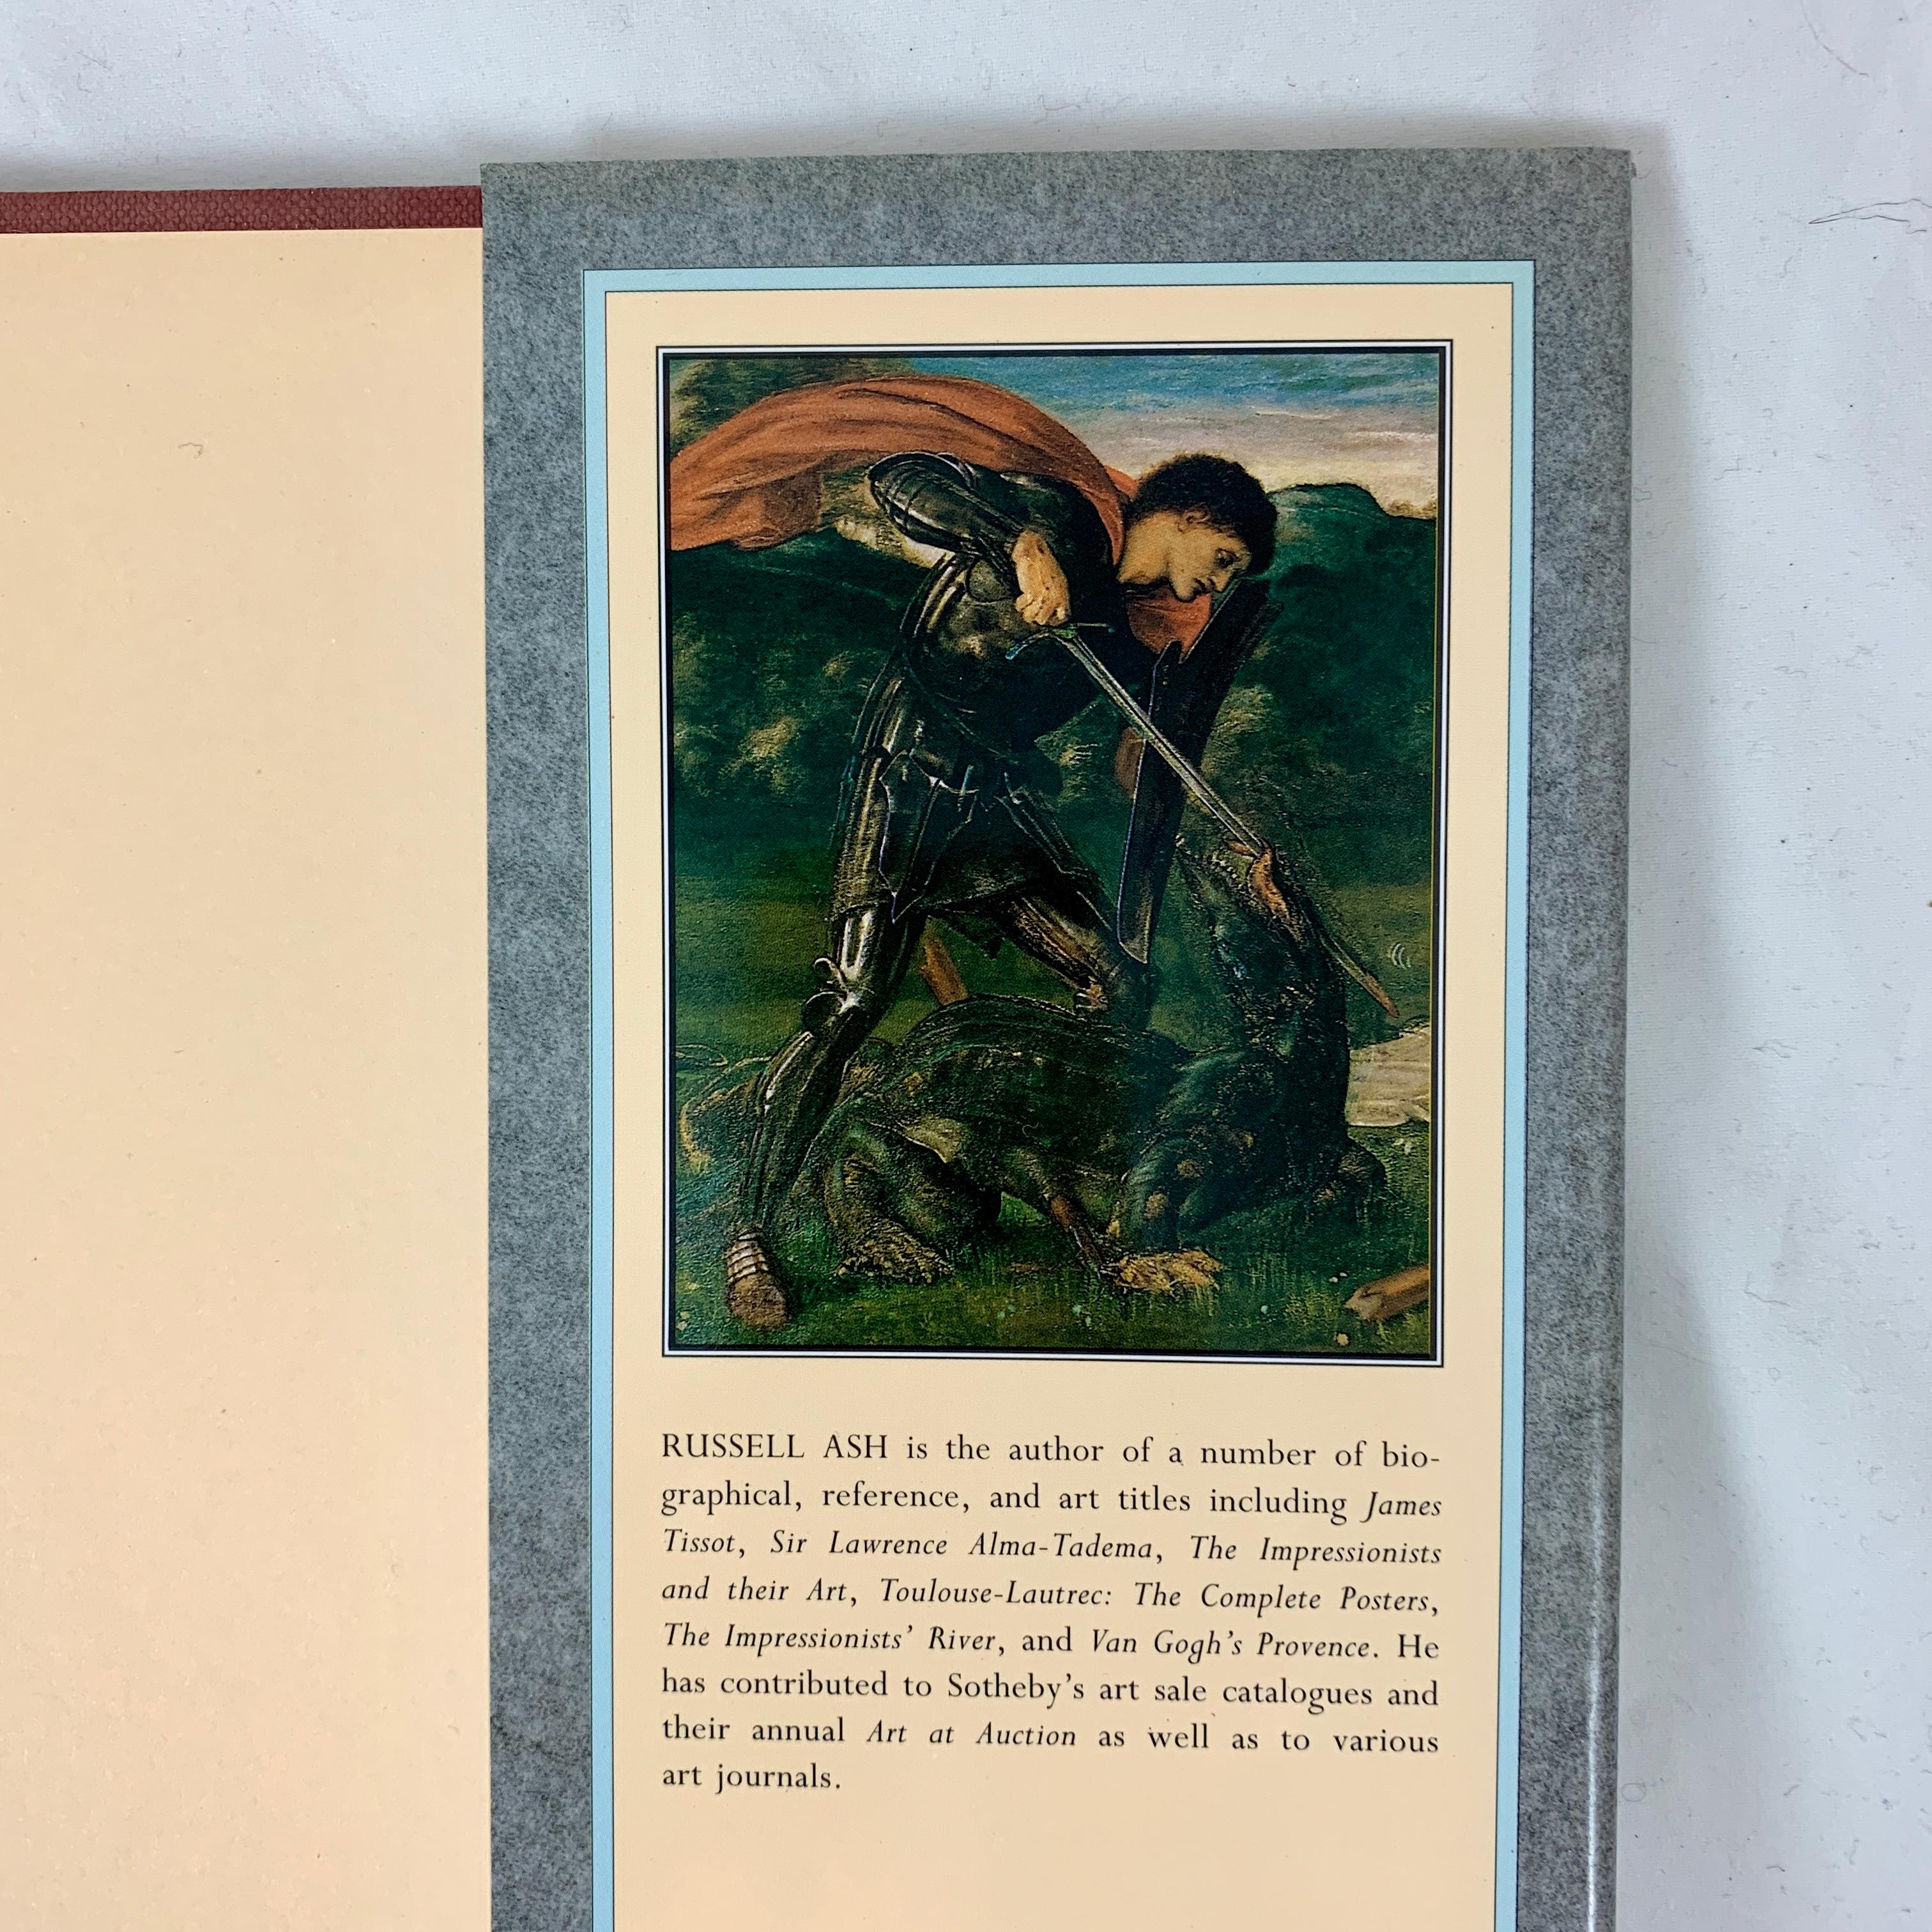 Sir Edward Burne-Jones Pre-Raphaelite Aesthetic Movement Art Book by Russell Ash In Good Condition For Sale In Philadelphia, PA